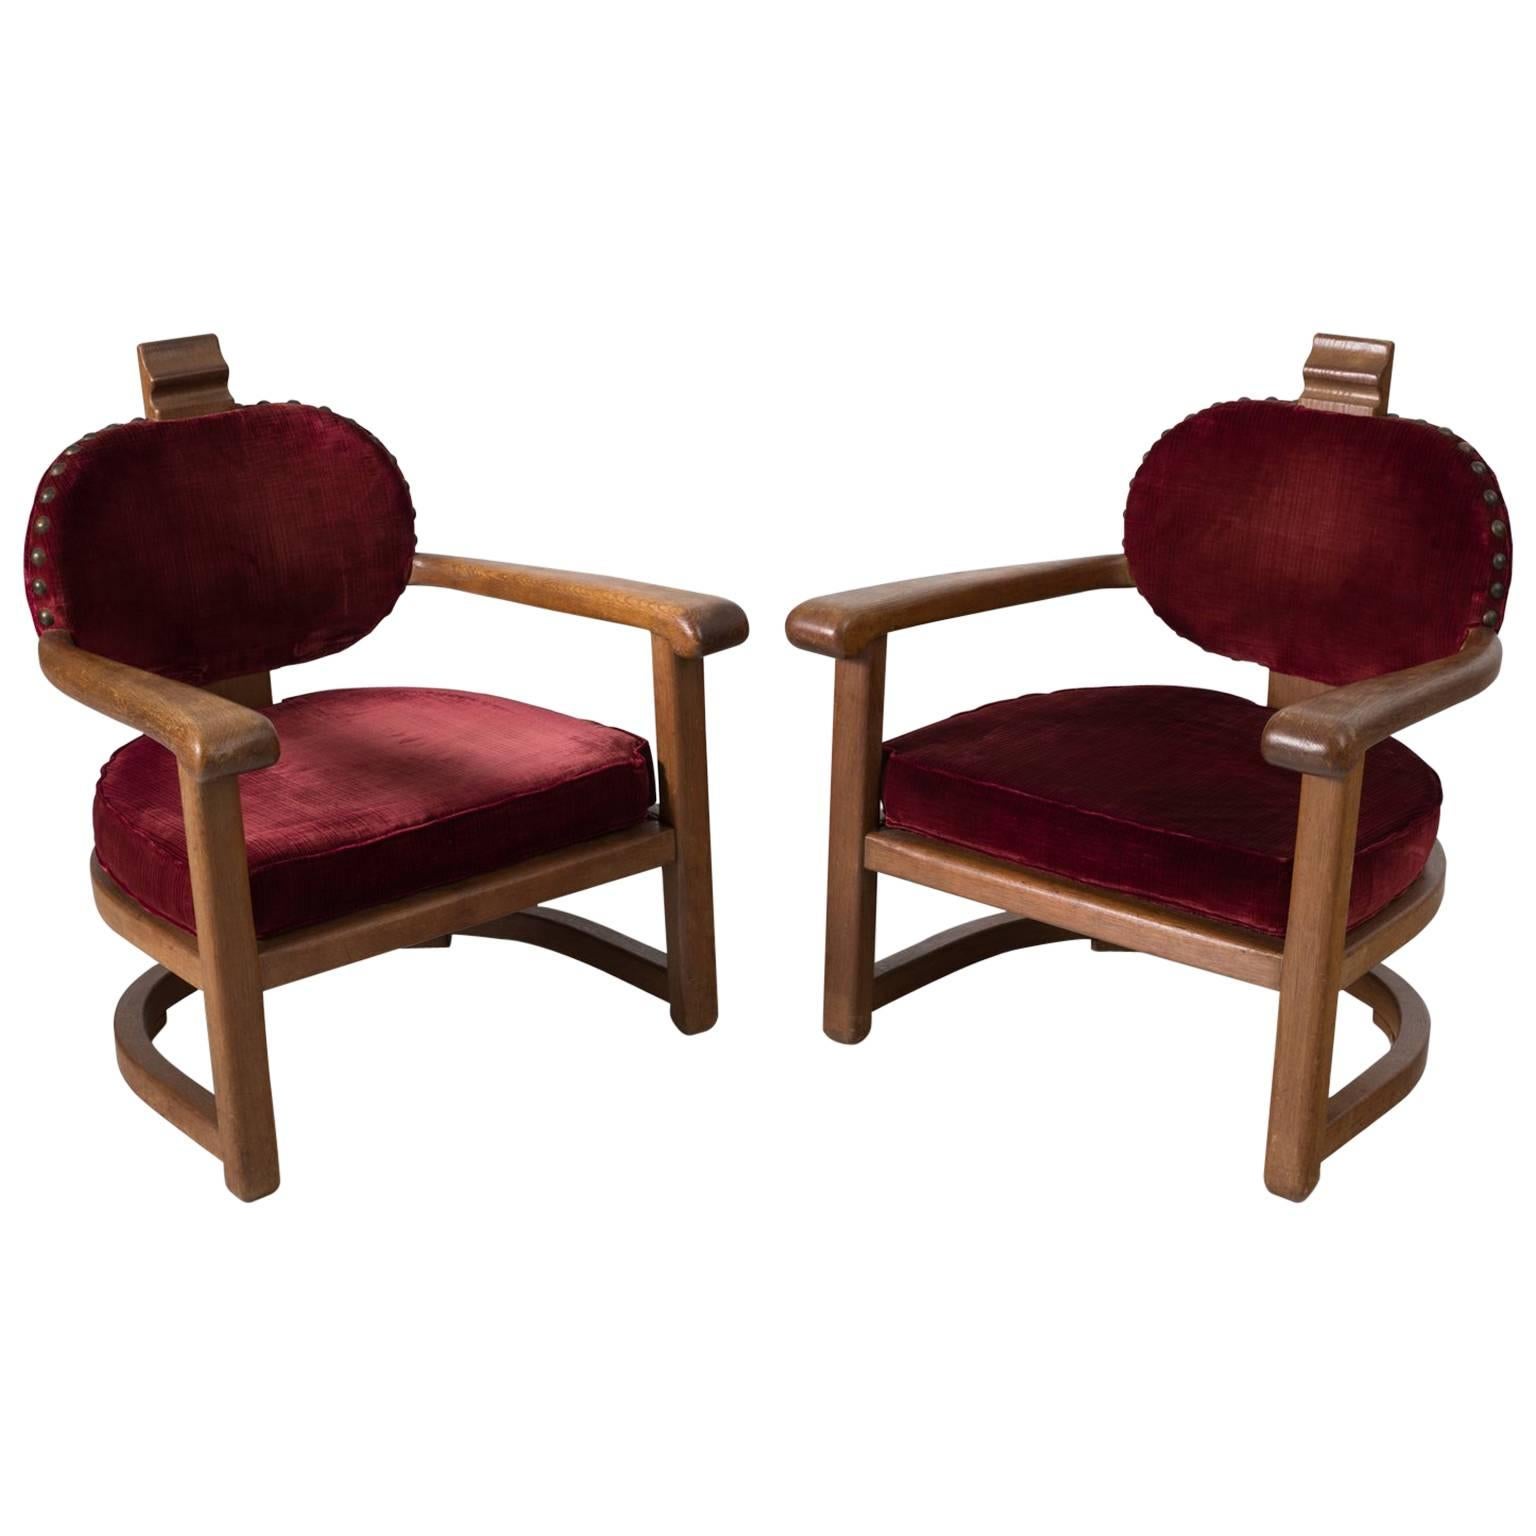 Set of two Art Deco Lounge Chairs in Solid Oak and Red Upholstery